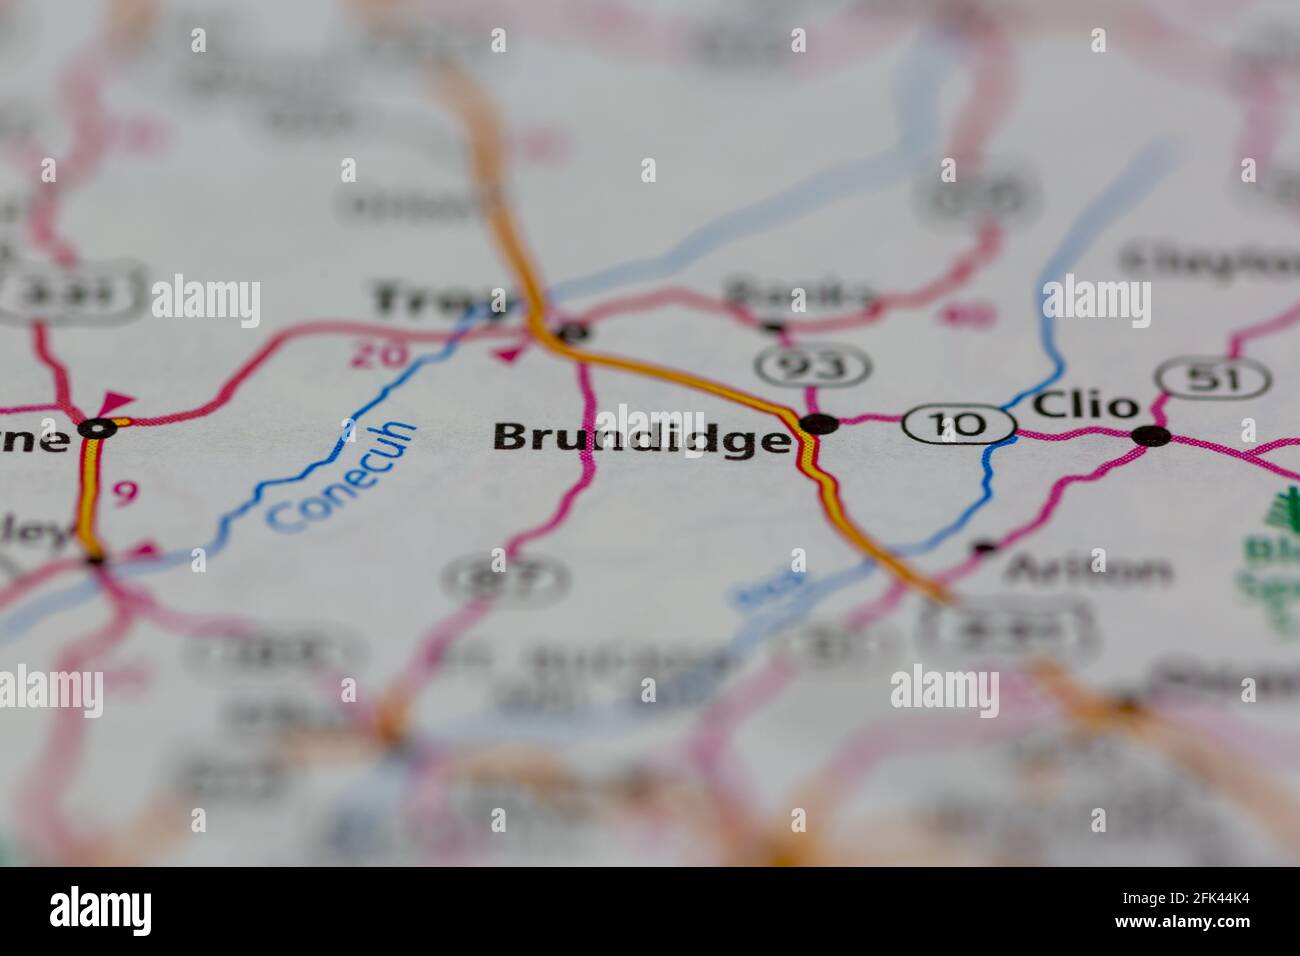 Brundidge Alabama USA shown on a geography map or road map Stock Photo